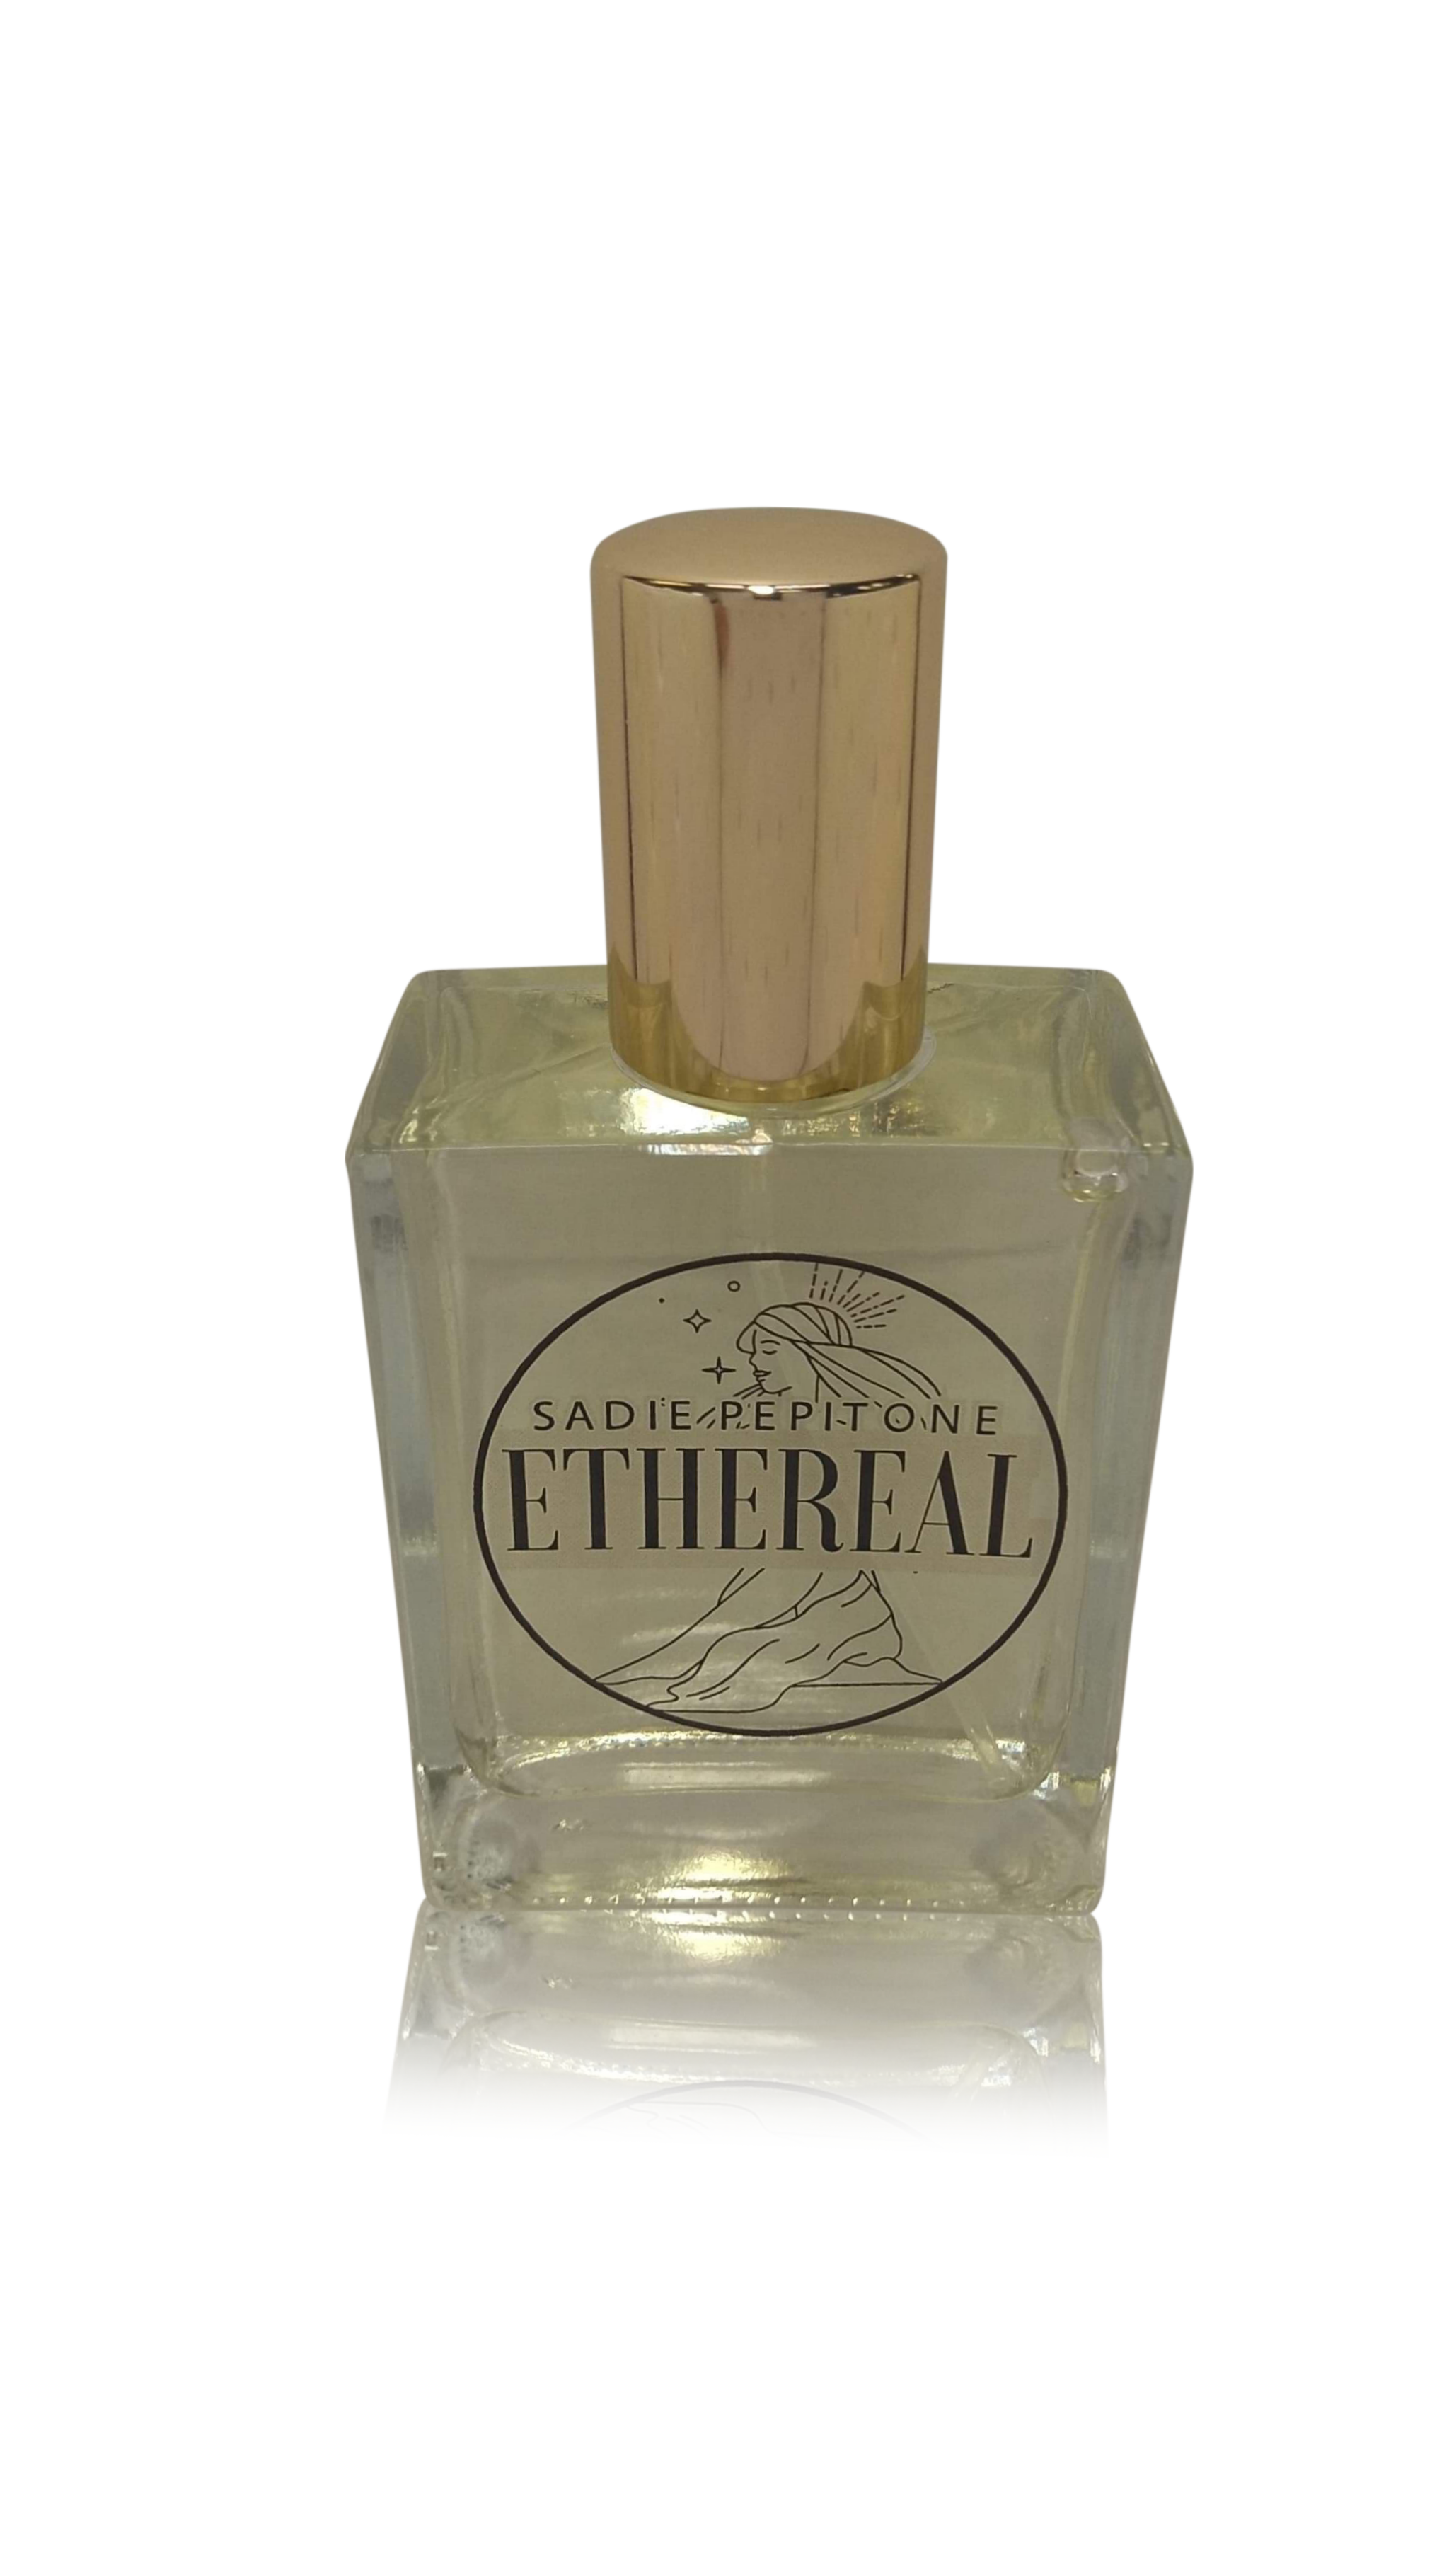 Ethereal, 3.4 Ounces Of Eau De Perfume – Scent Crafters